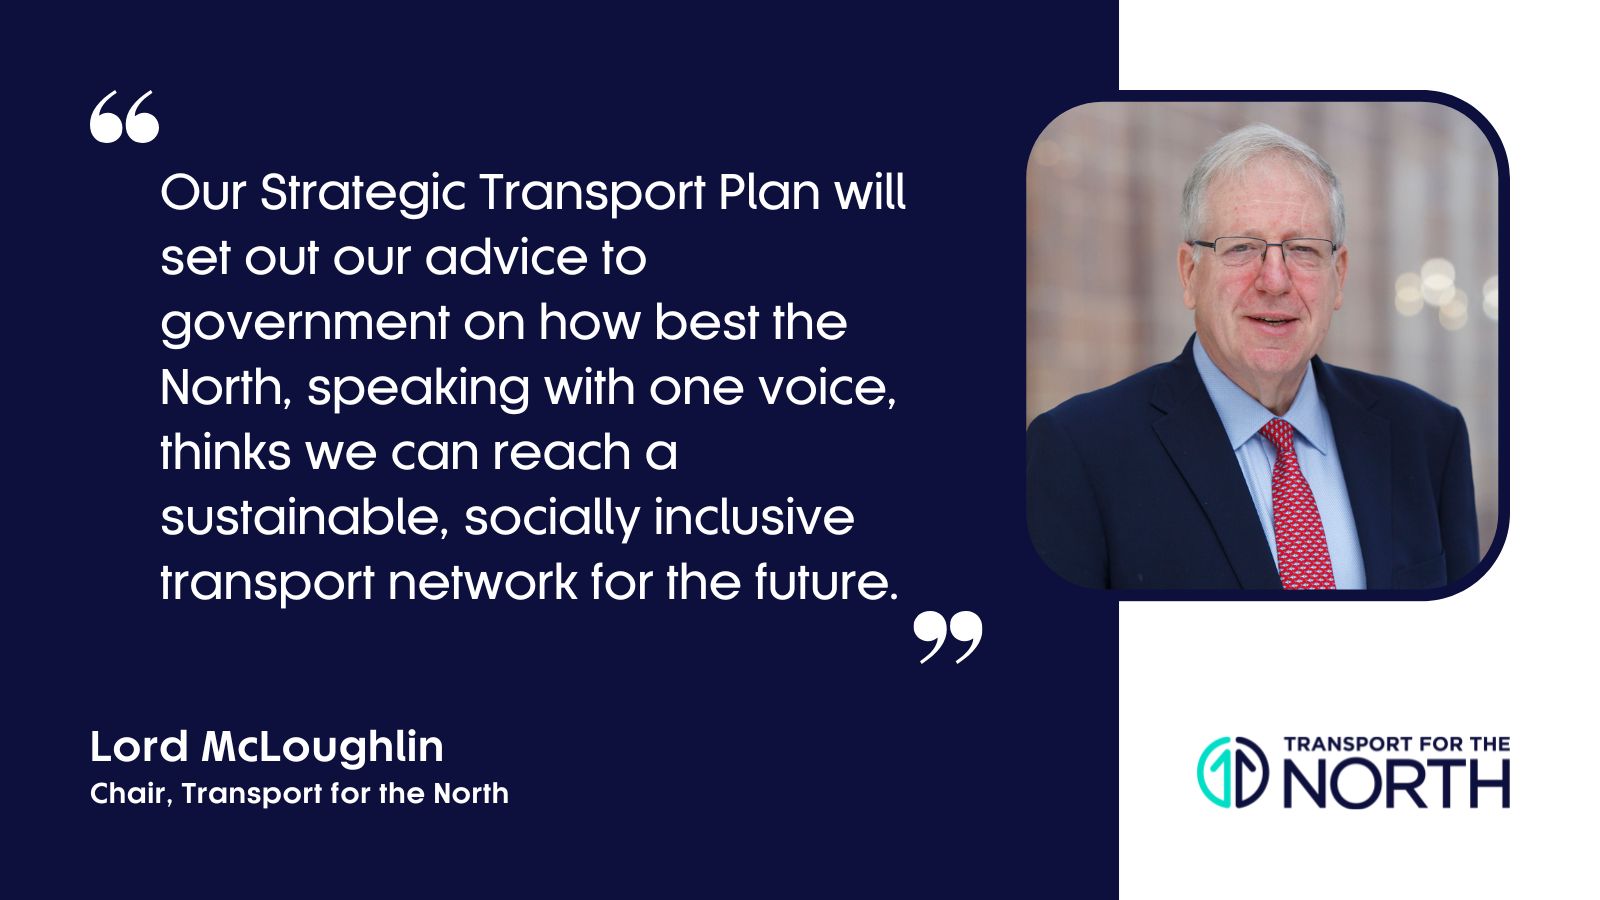 Lord McLoughlin quote for STP launch